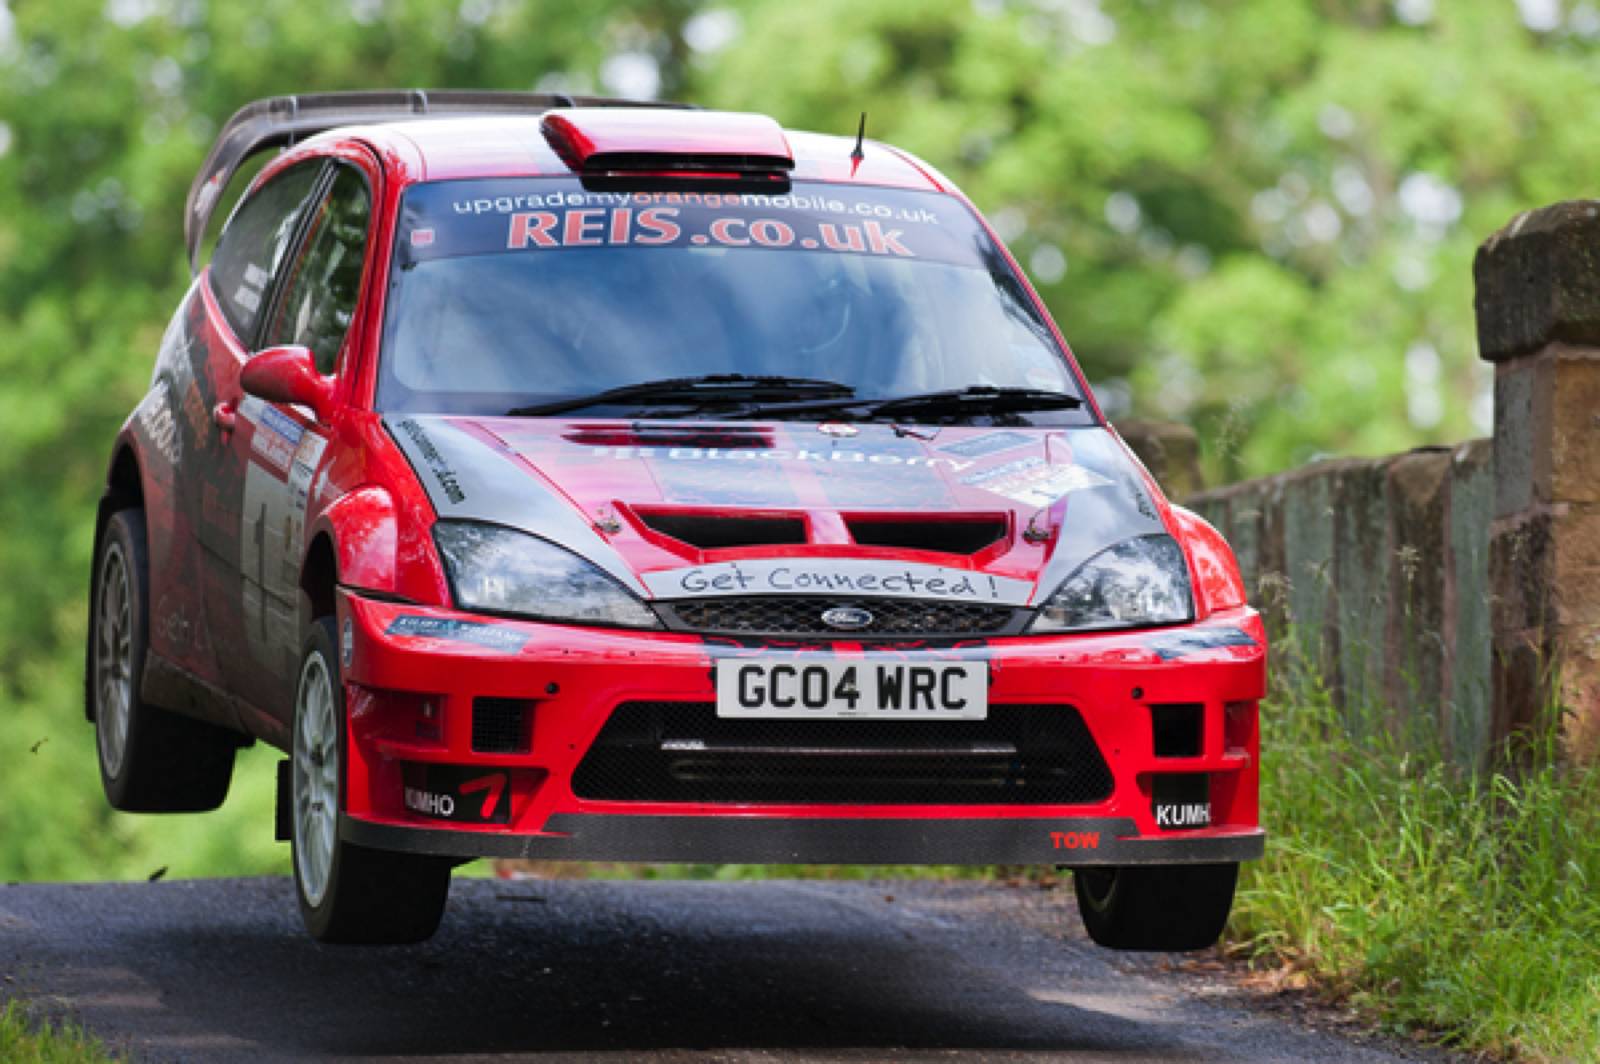 get-connected-rally-team-gallery-rally-of-midlands-2011-00001